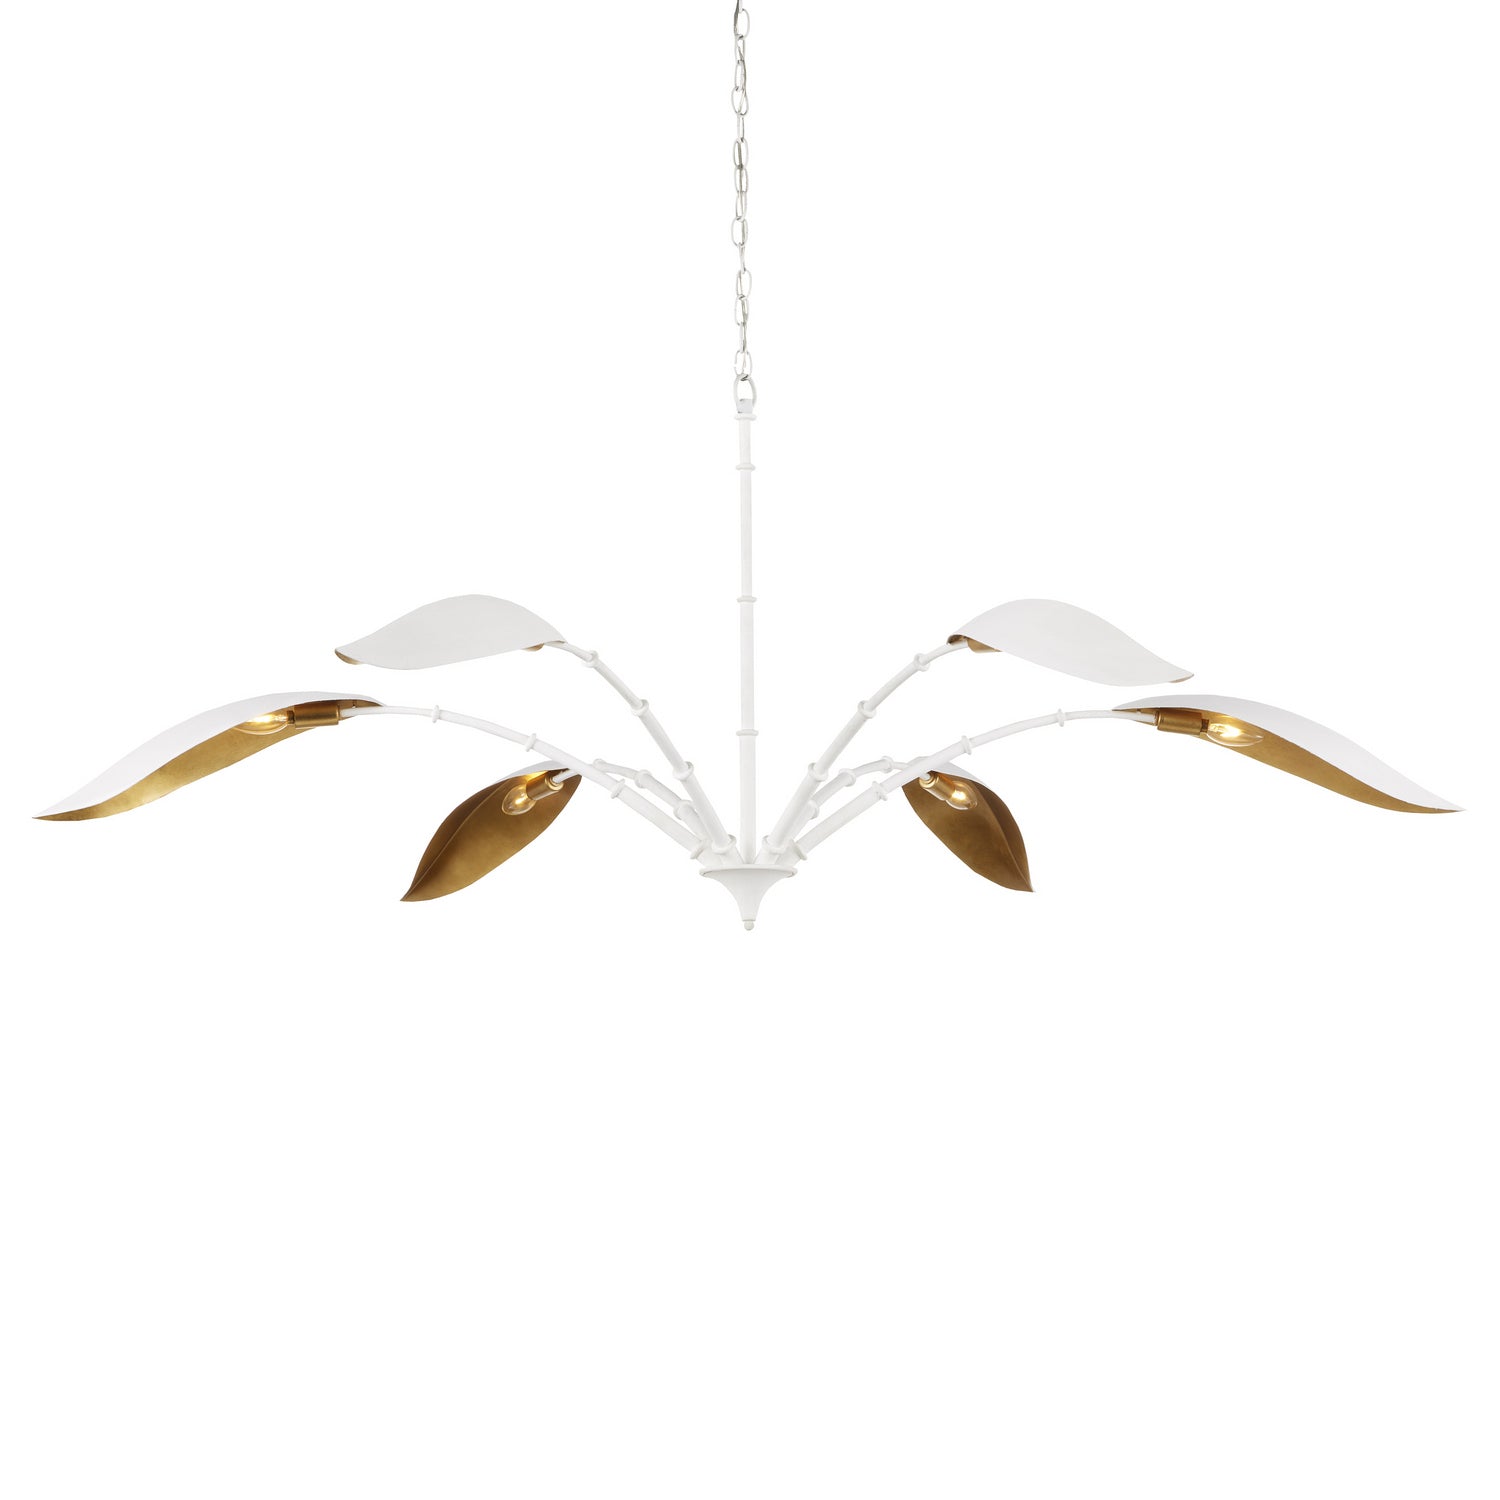 Currey and Company - 9000-0974 - Six Light Chandelier - Yuriko - Gesso White/Contemporary Gold Leaf